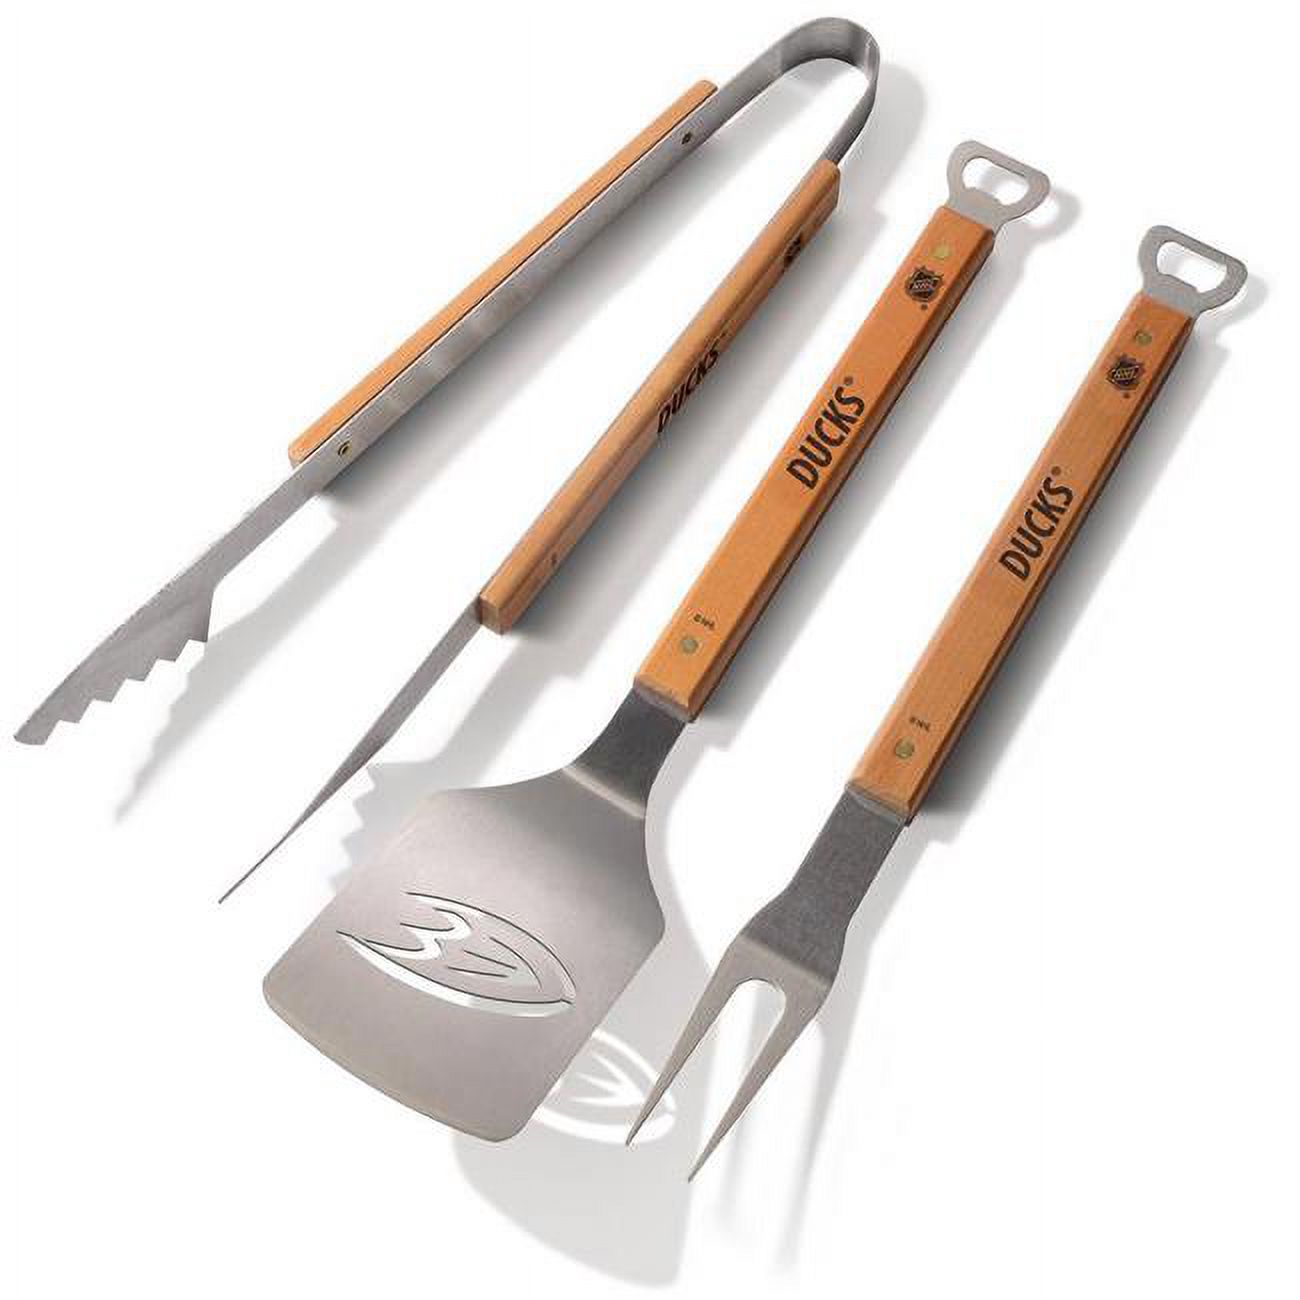 YouTheFan 7013367 NHL Anaheim Ducks Classic Series BBQ Set, Mult Ccolor - 3 Piece - image 1 of 3